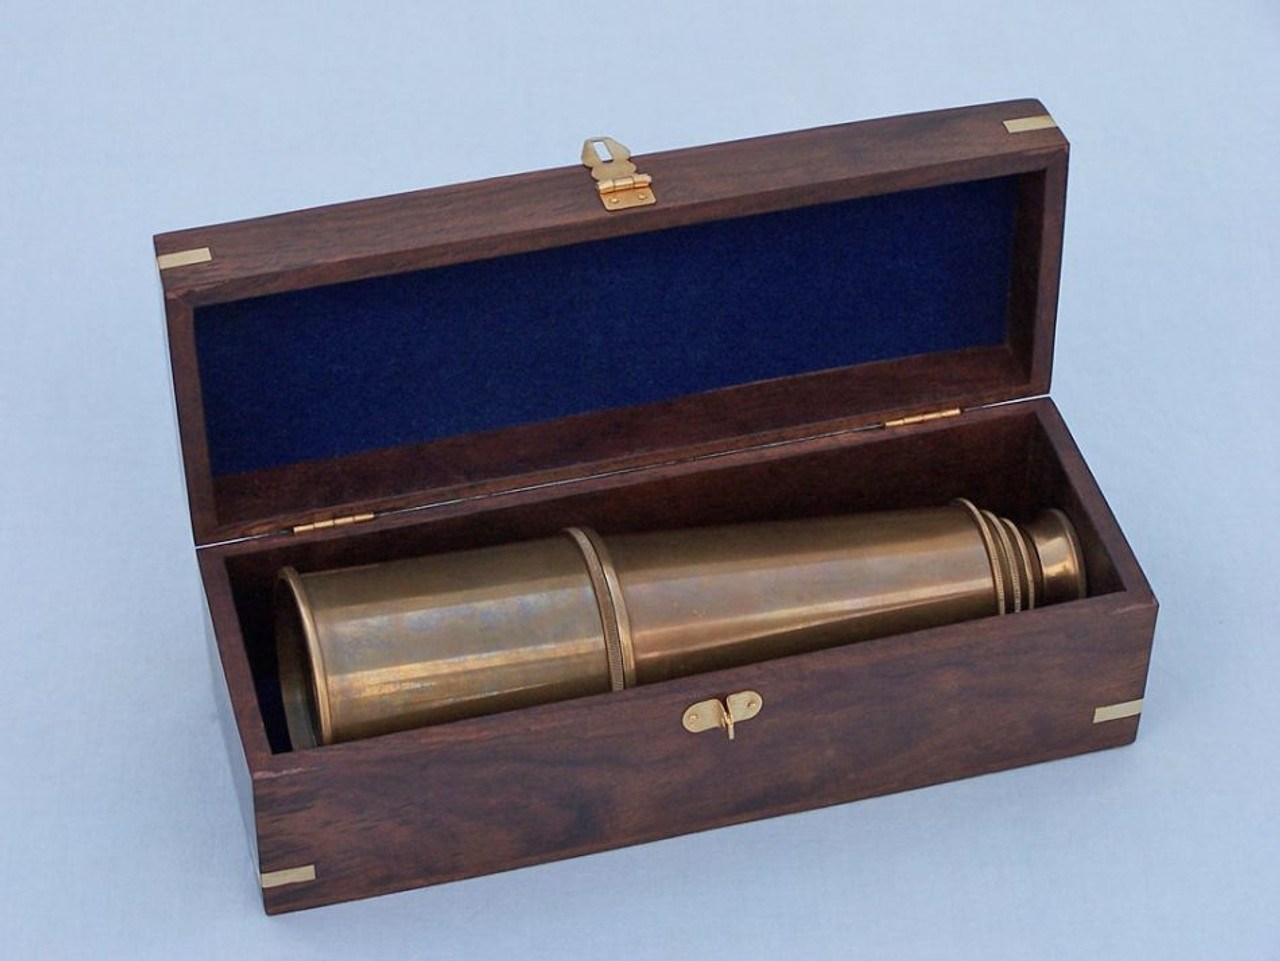  Deluxe Class  Antique Brass Admiral's Spyglass Telescope 27" with Rosewood Box